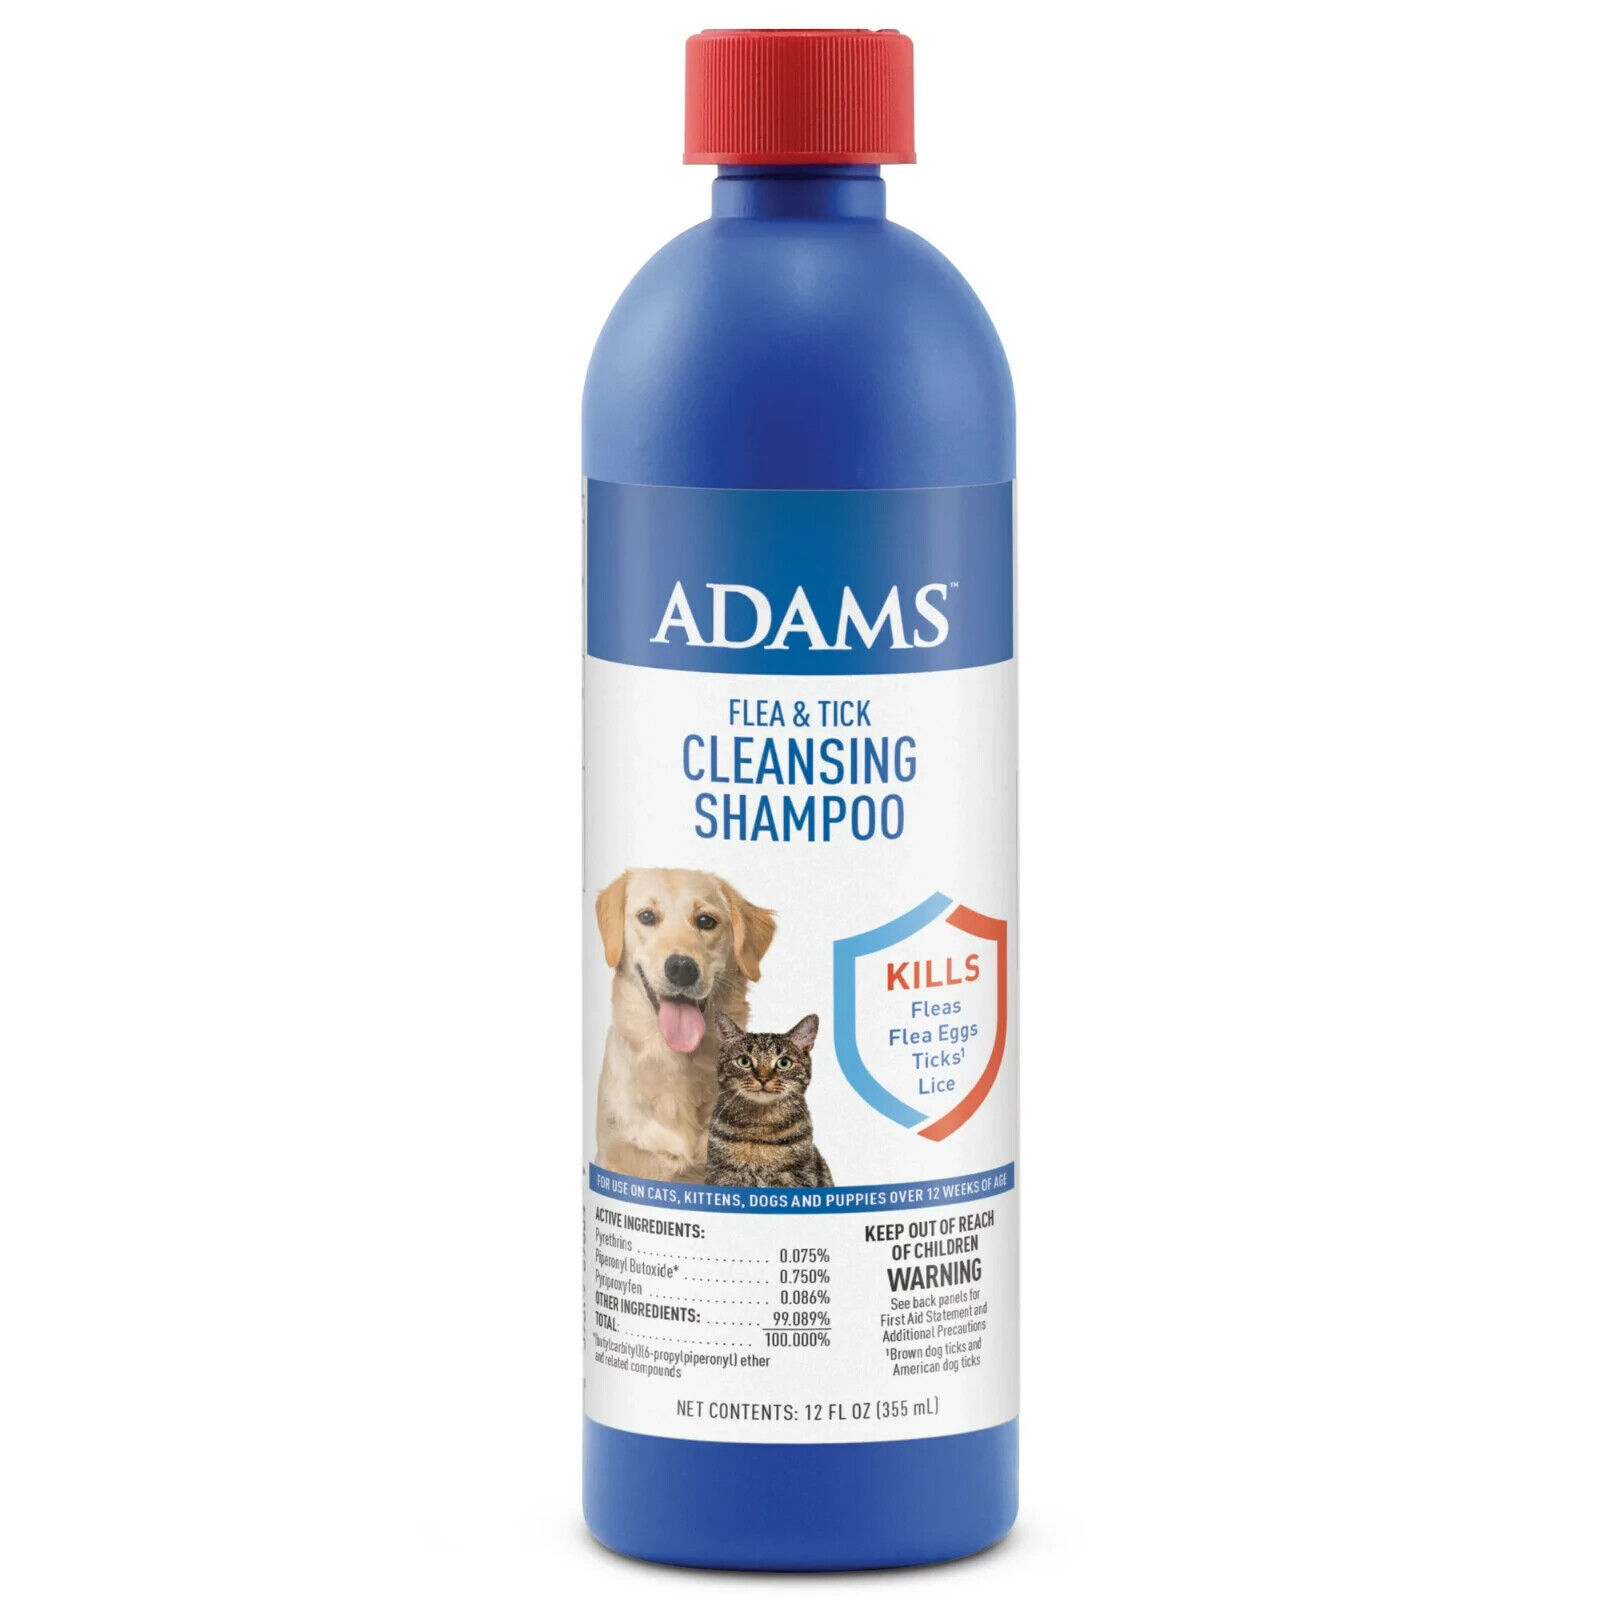 Flea & Tick Cleansing Shampoo for Cats and Dogs, 12 ounces